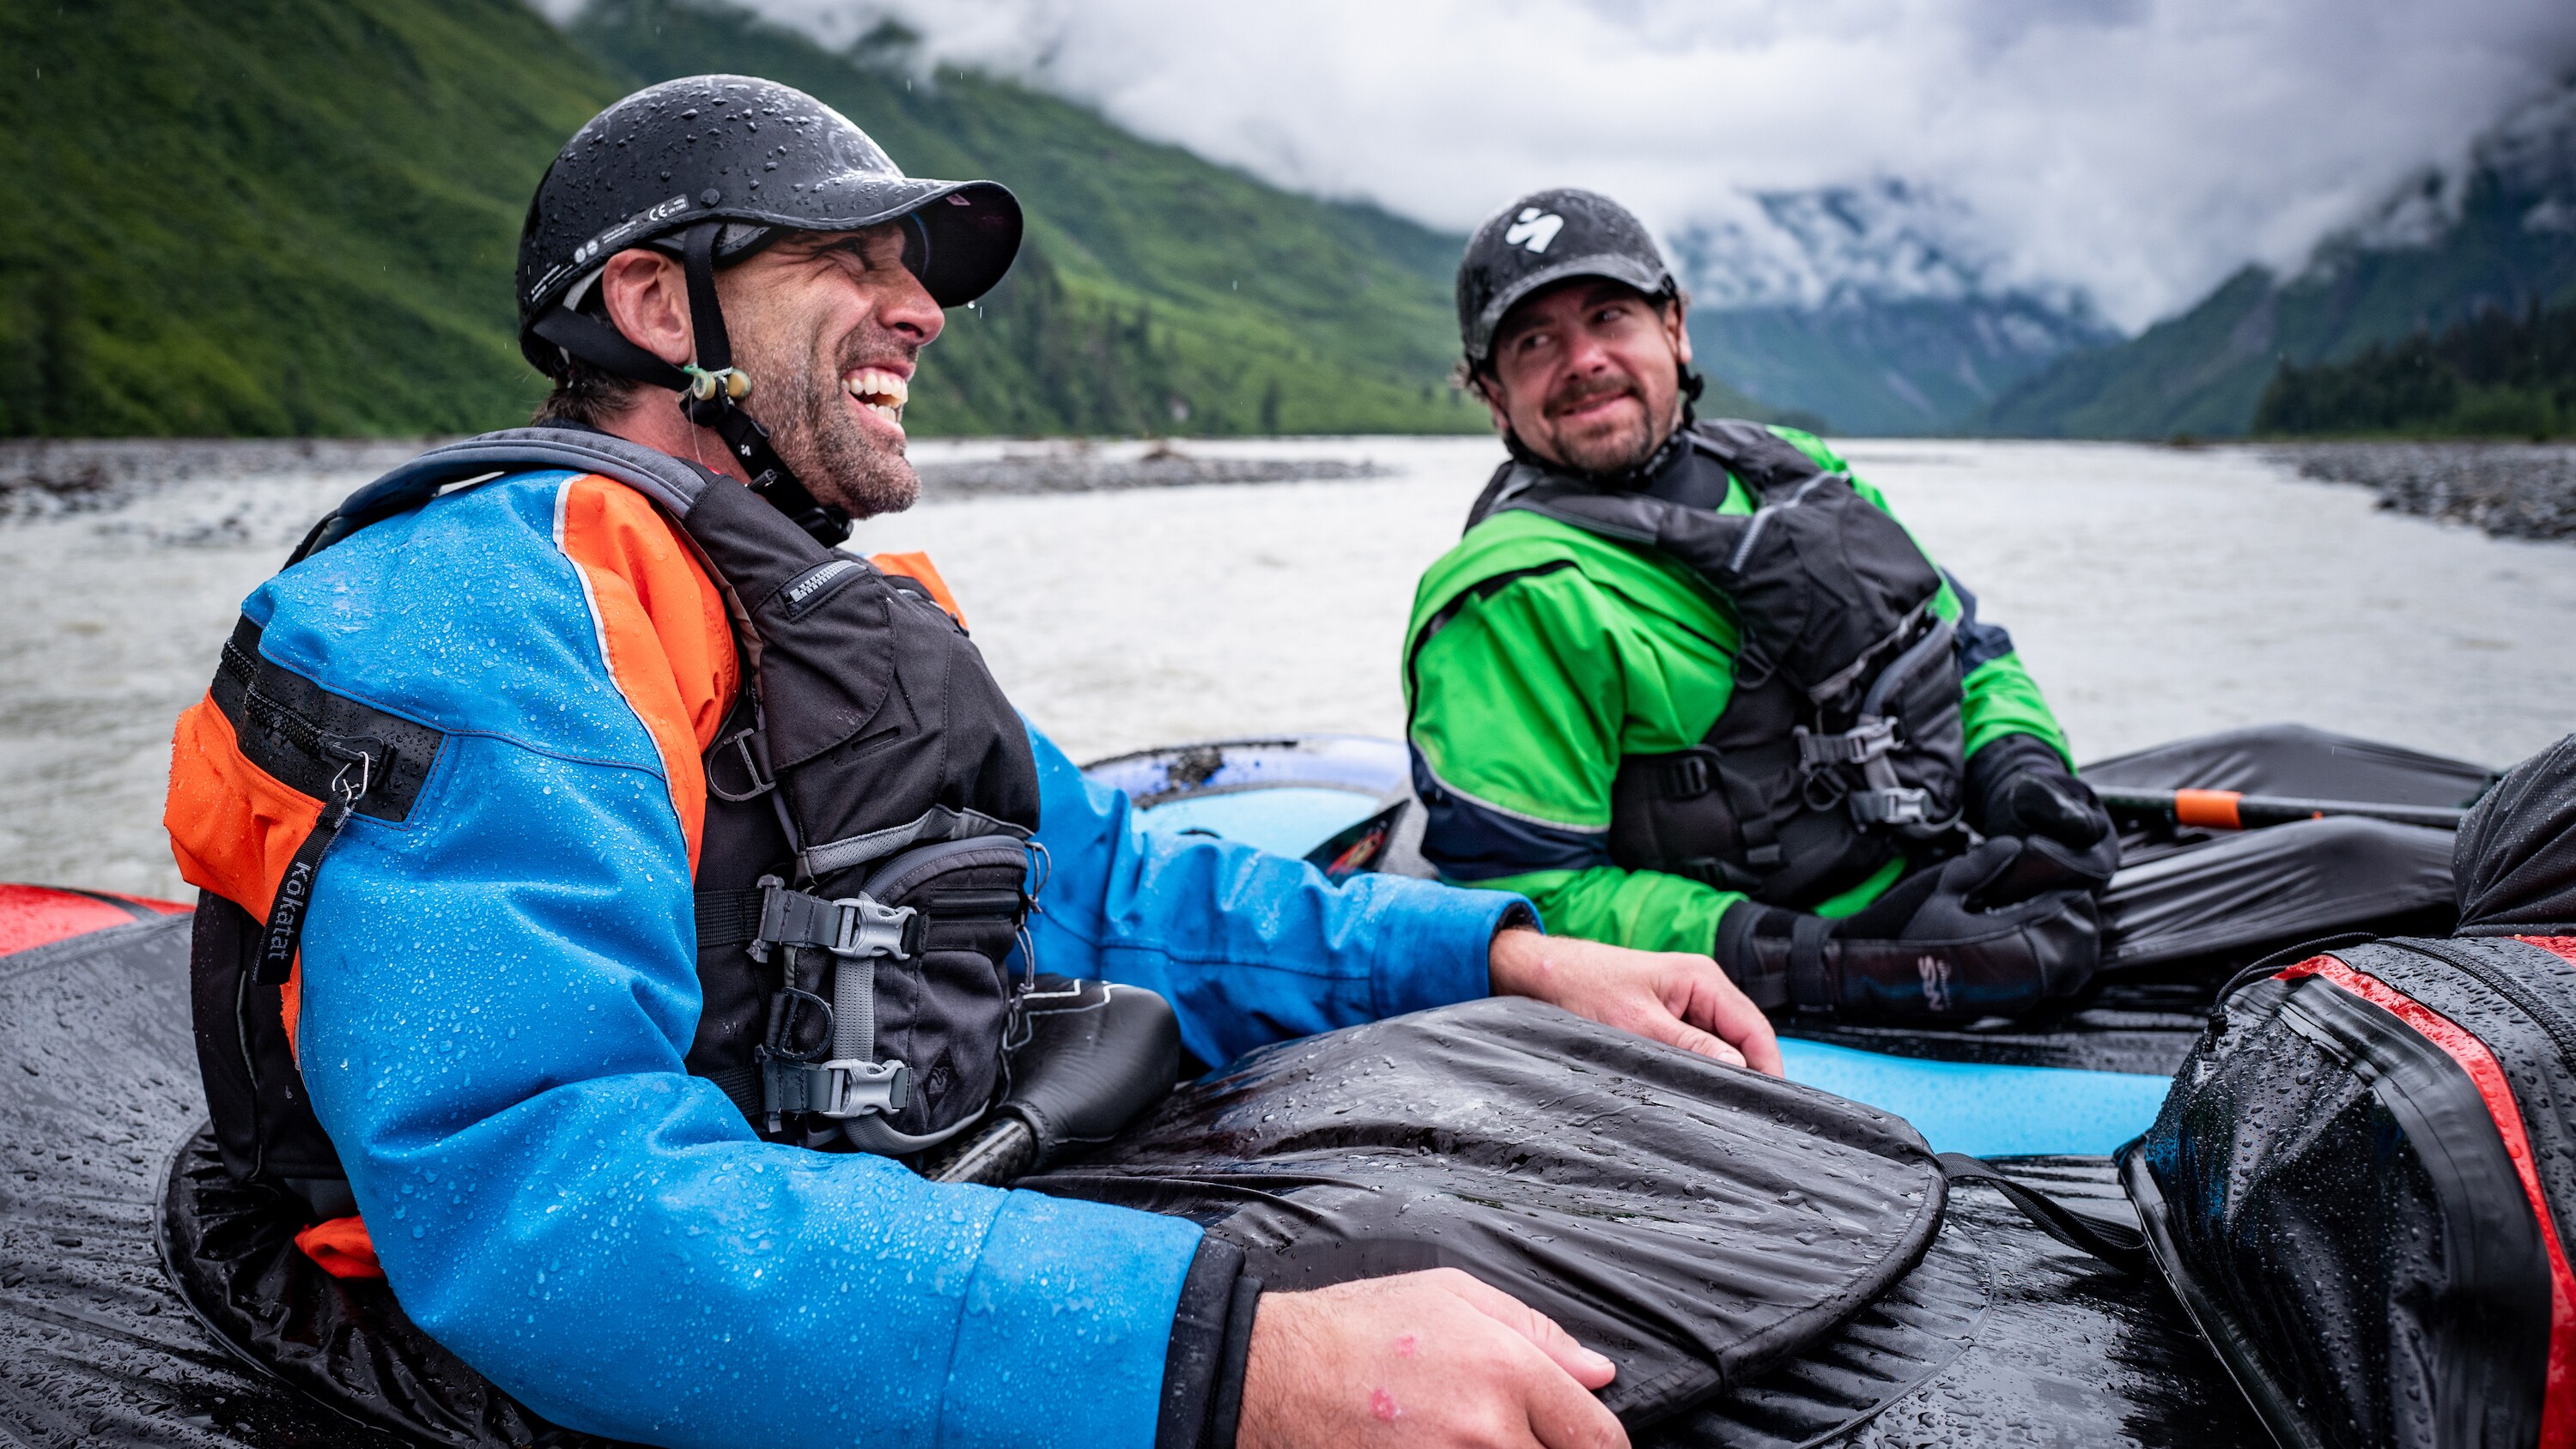 Blind Explorer Erik Weihenmayer and his friend Harlan Taney after a successful descent of rapids on the Tsirku river.  (National Geographic for Disney+/Oliver Richards)